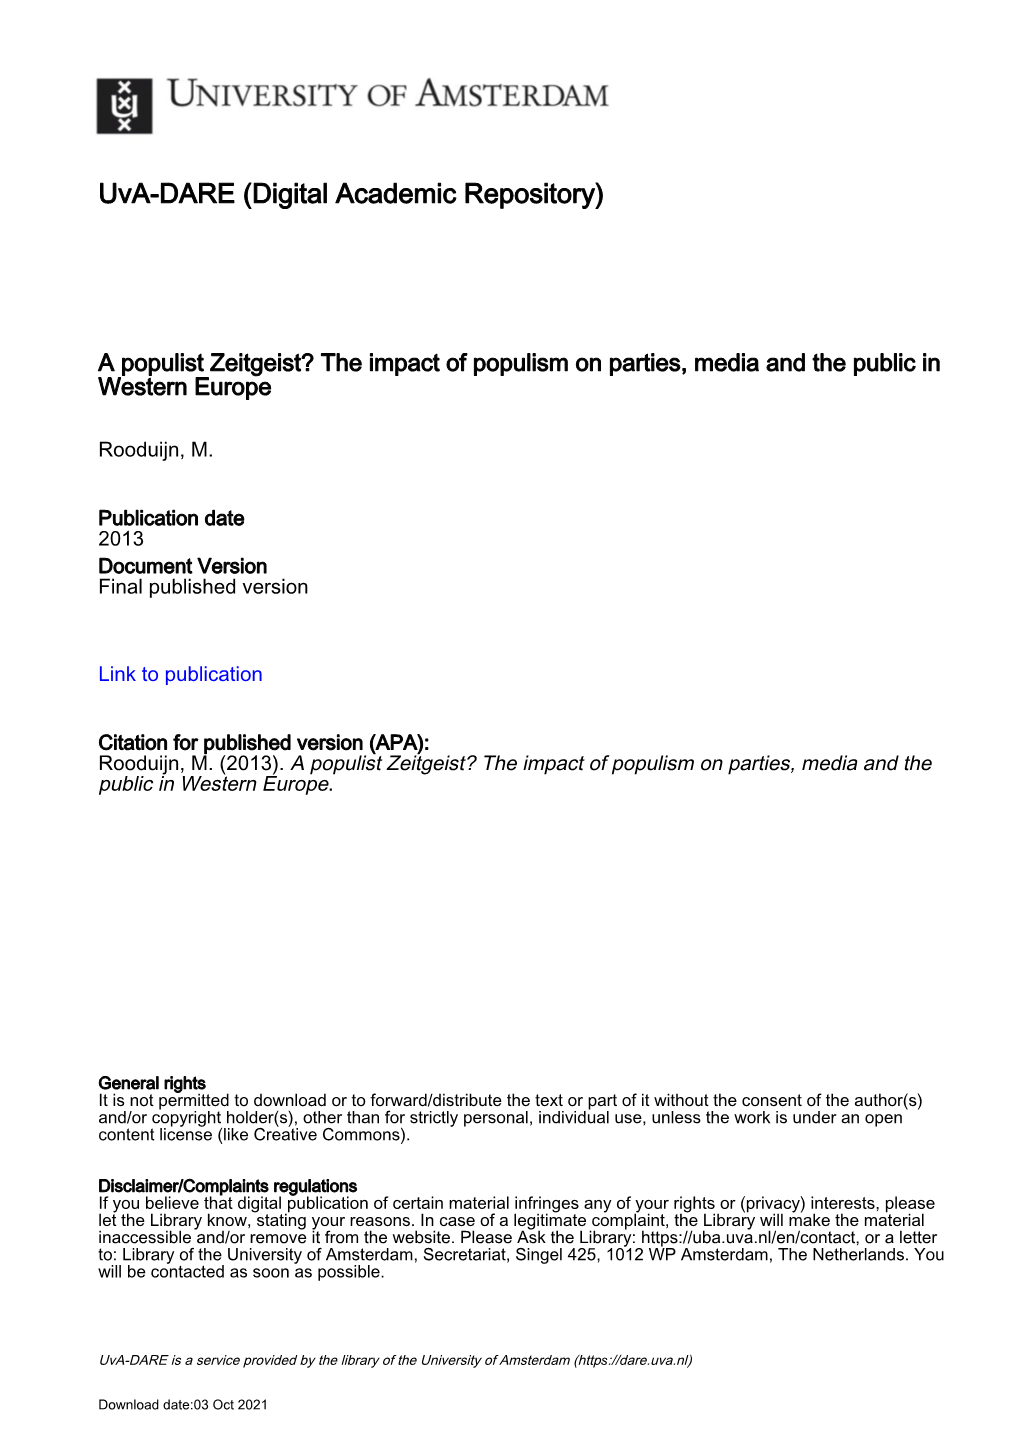 A Populist Zeitgeist? the Impact of Populism on Parties, Media and the Public in Western Europe